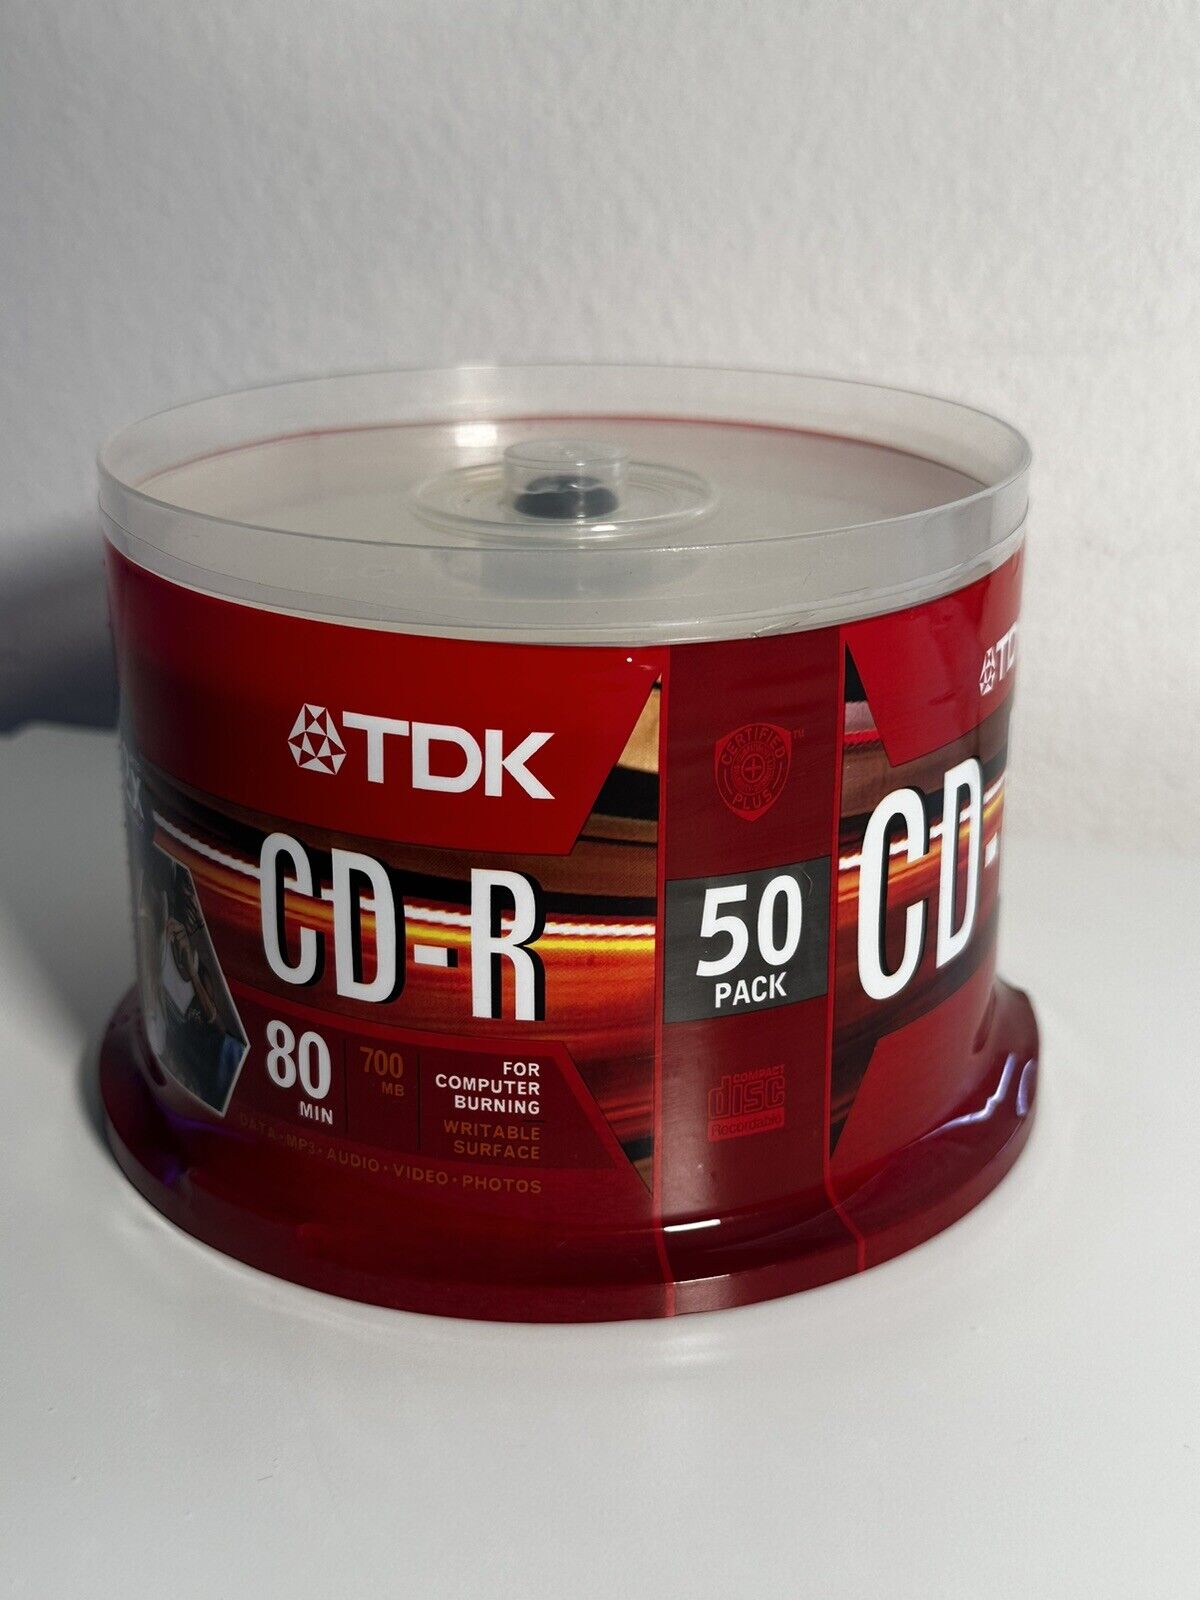 TDK CD-R New 50 Pack Blank Data Computer Burning 48x 700mb 80 Min Recordable